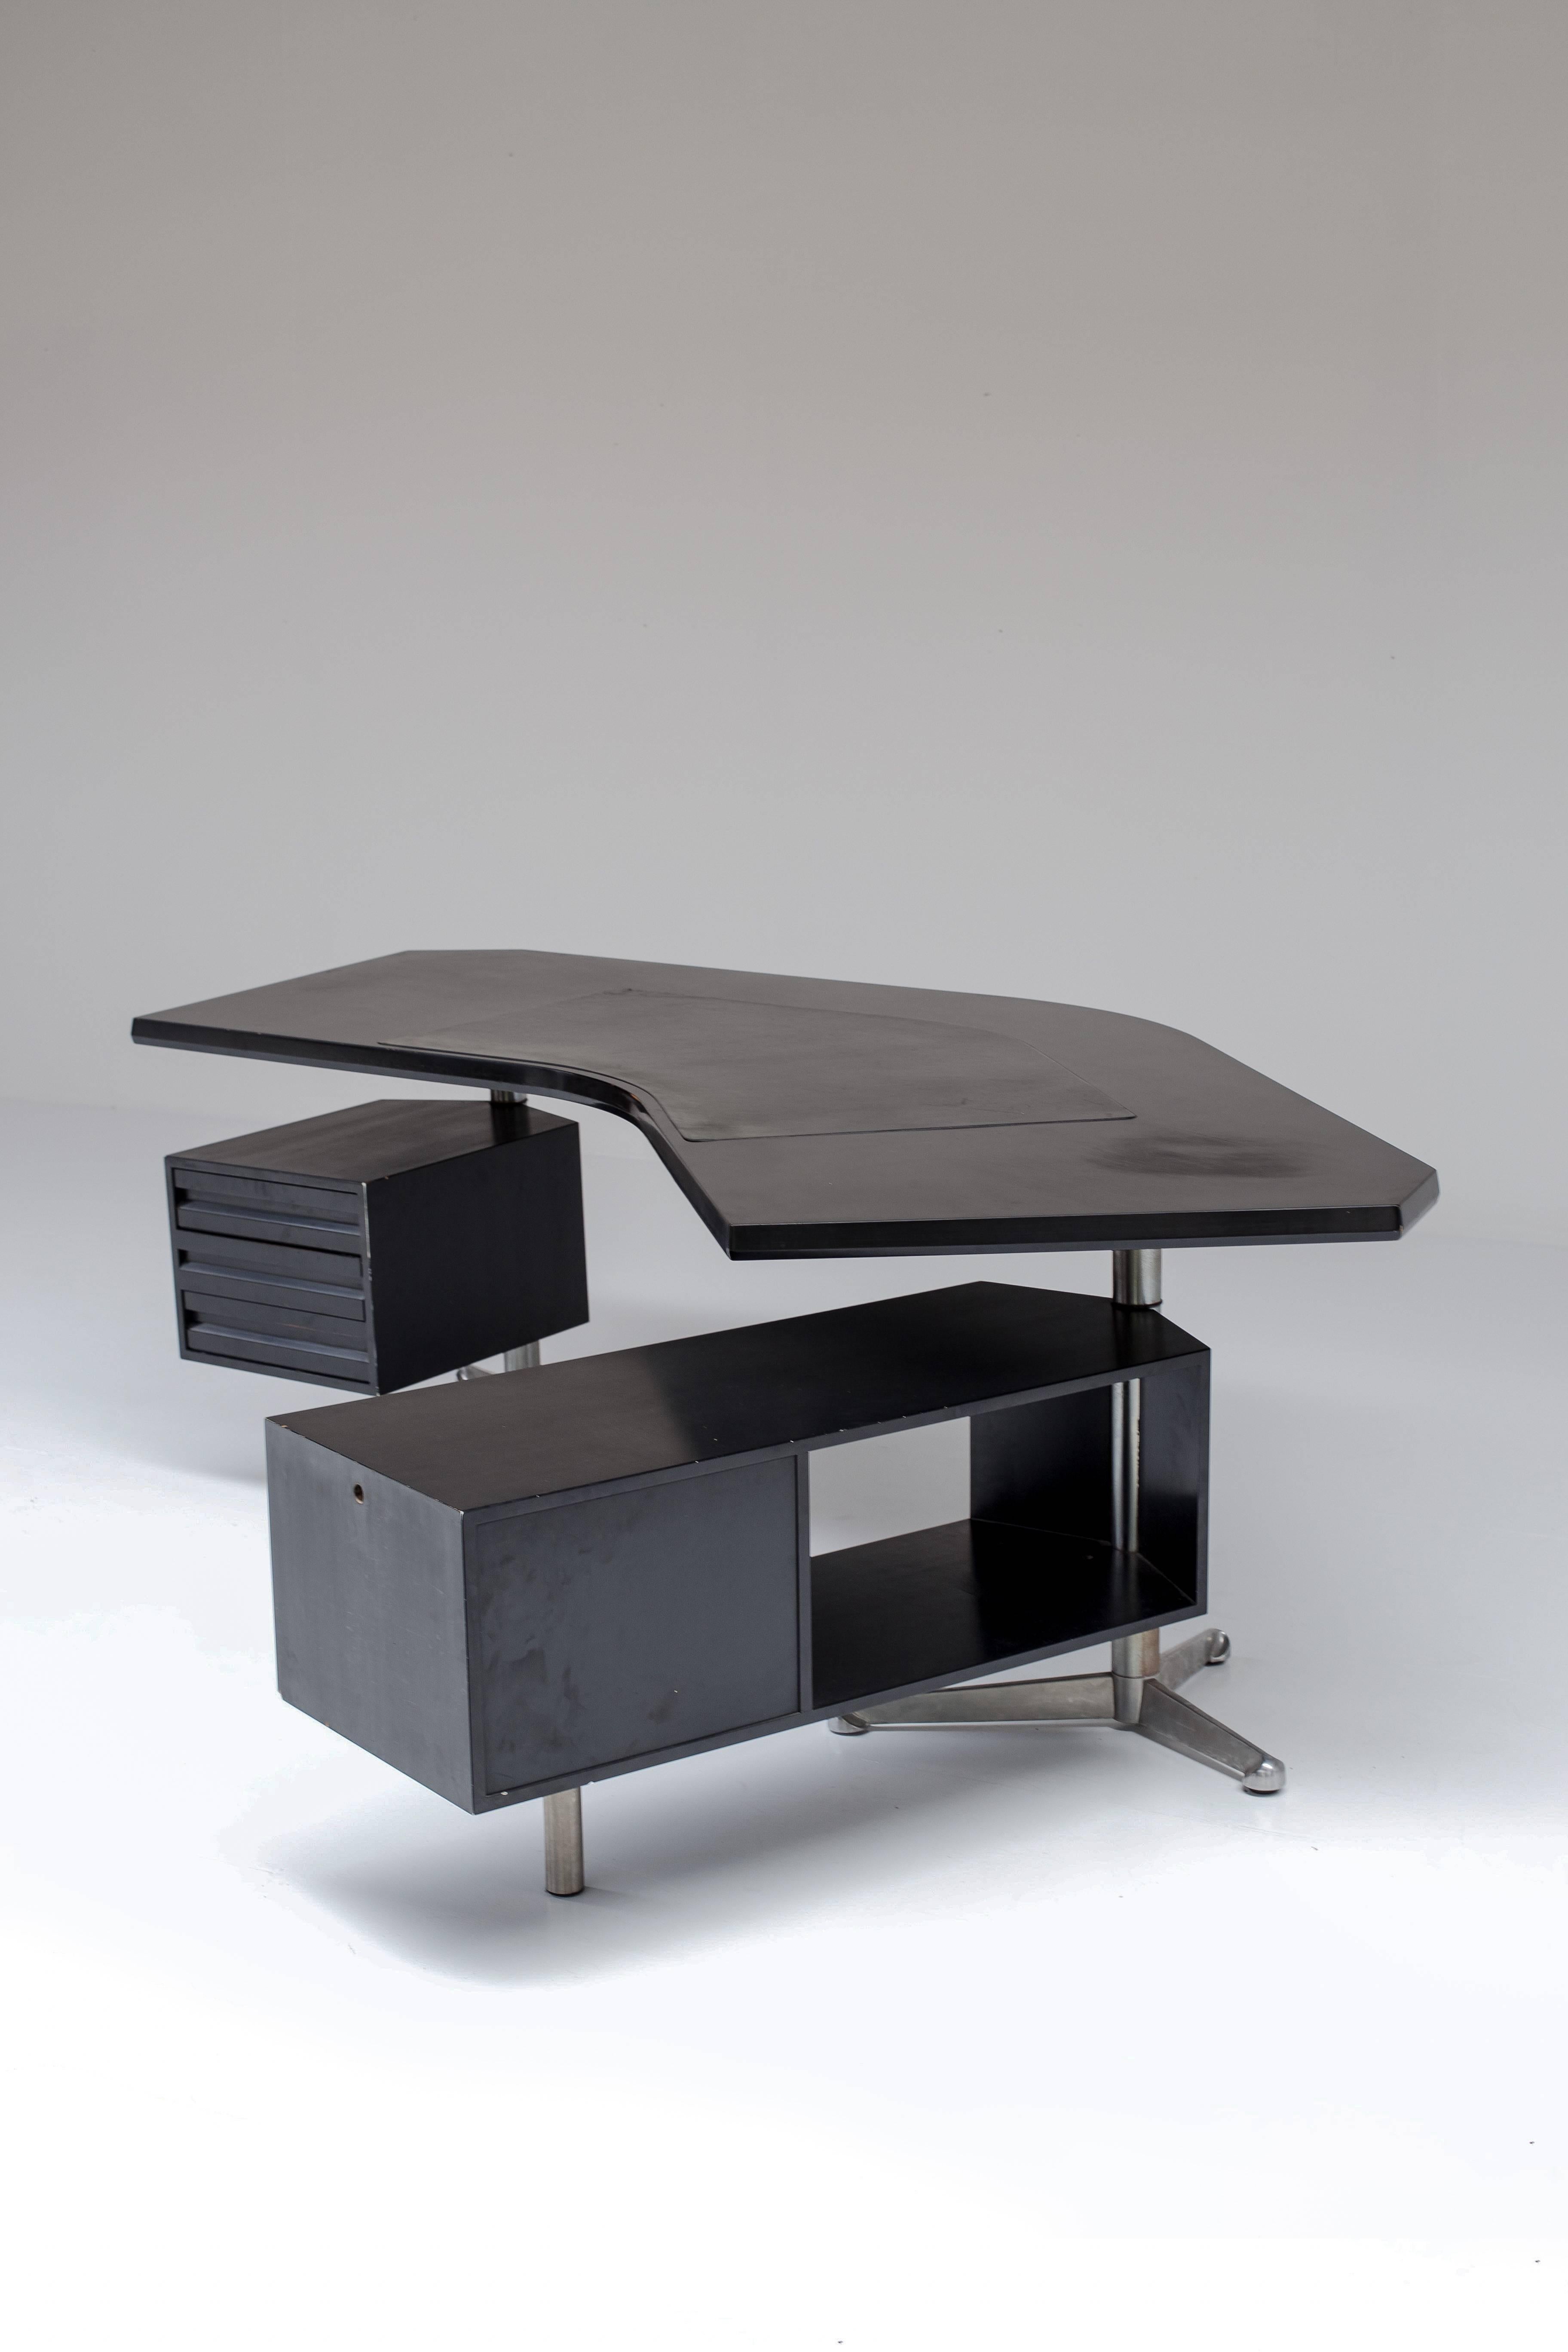 Desk T-96 'Boomerang', in wood and metal, by Osvaldo Borsani for Tecno, Italy, 1956.

A very nice black version of this well-known design by Osvaldo Borsani. The two revolving cabinets are held in place by the characteristic stainless steel